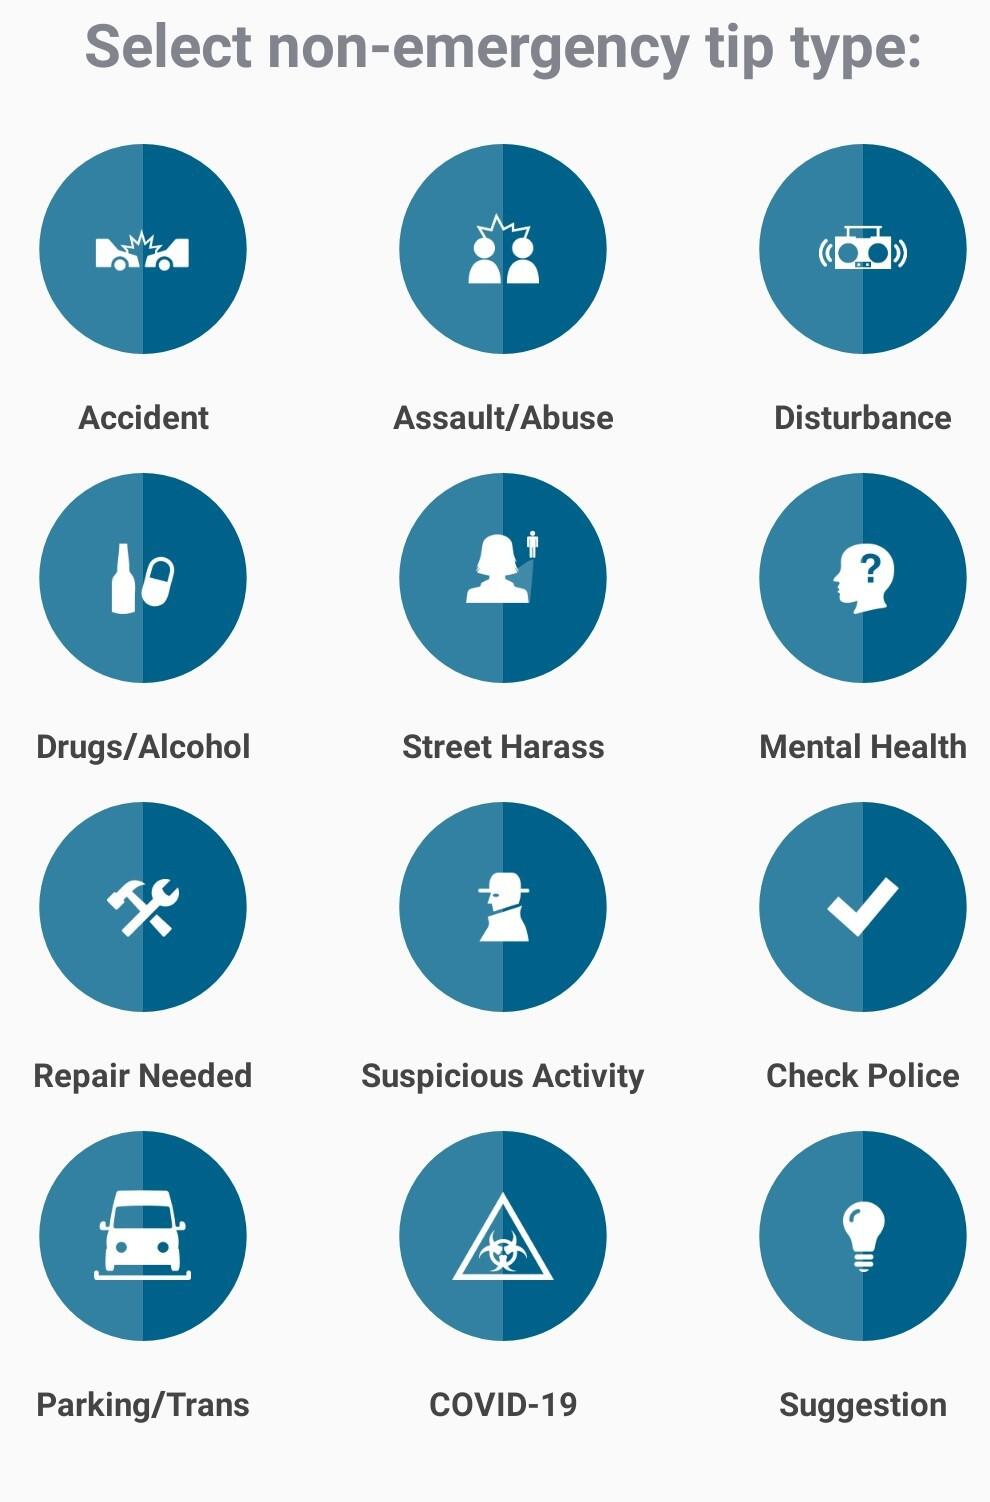 Text on image states "Select non-emergency tip type:" with options and images include accident, assault/abuse, disturbance, drugs/alcohol, street harassment, mental health, repair needed, suspicious activity, check police, parking/transportation, COVID-19, and a suggestion.